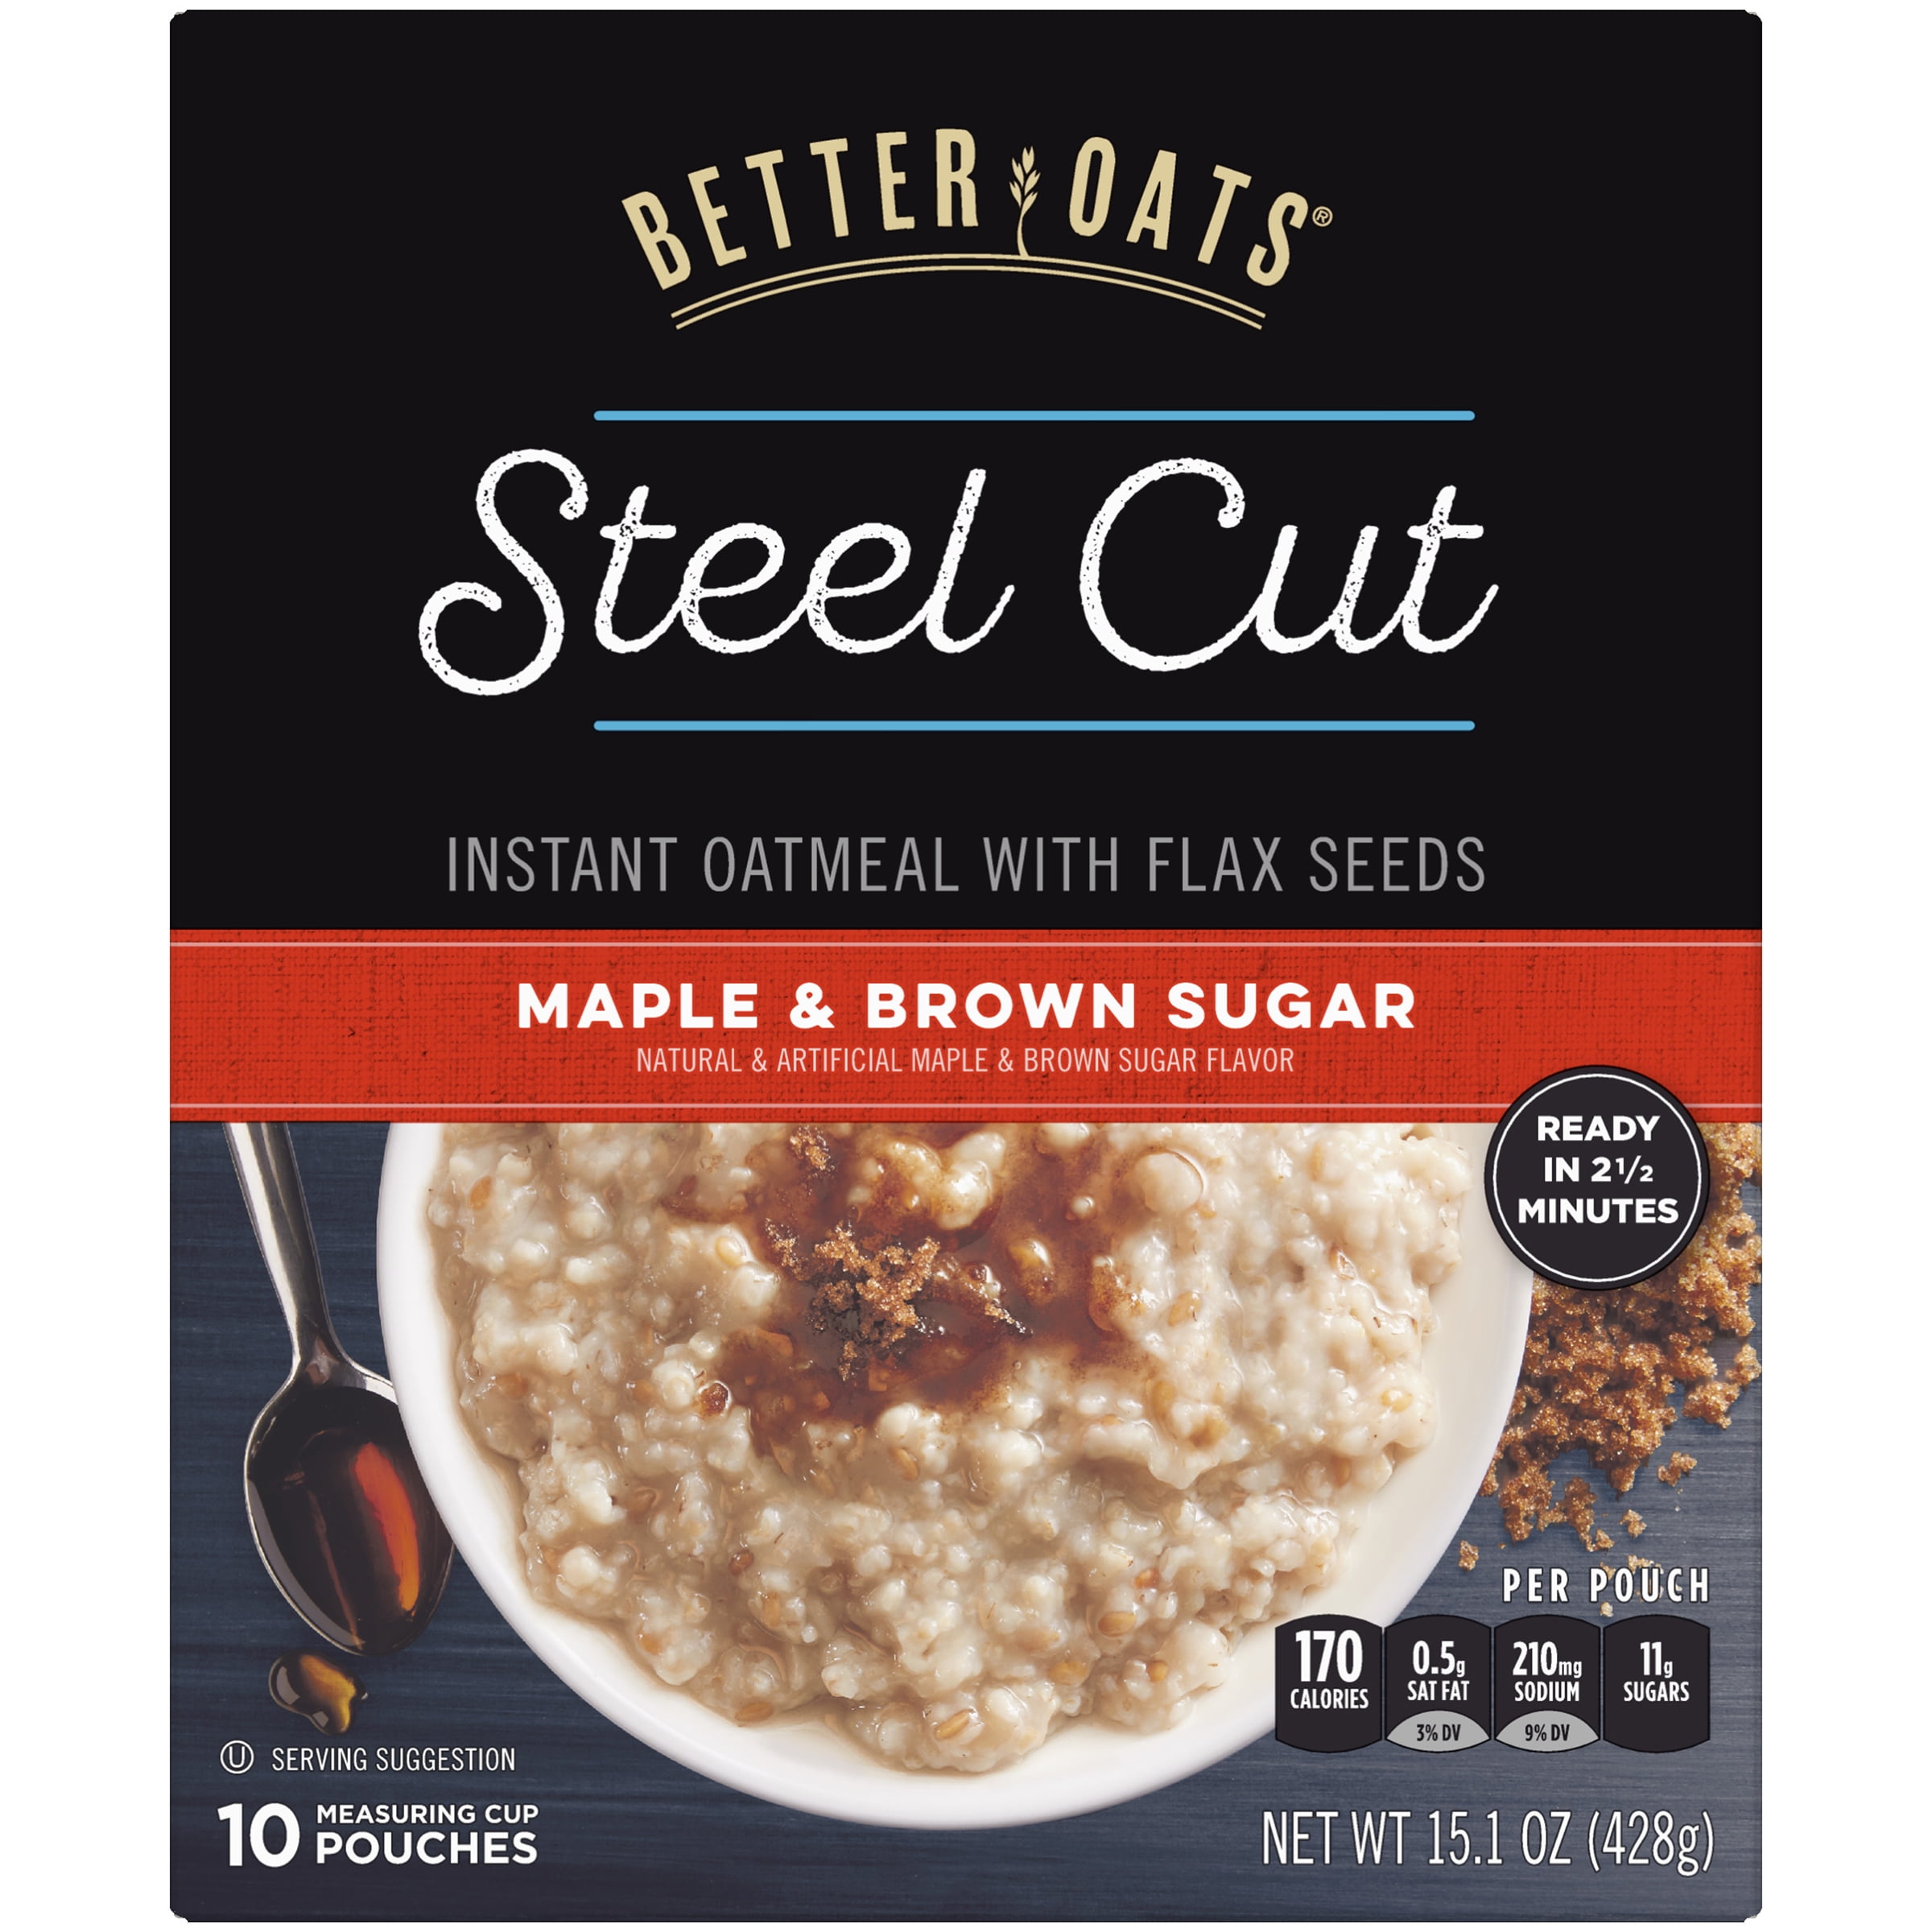 Better Oats Maple and Brown Sugar Steel Cut Oatmeal Packets with Flax Seeds, 10 Instant Oatmeal Packets, 15.1 OZ Pack